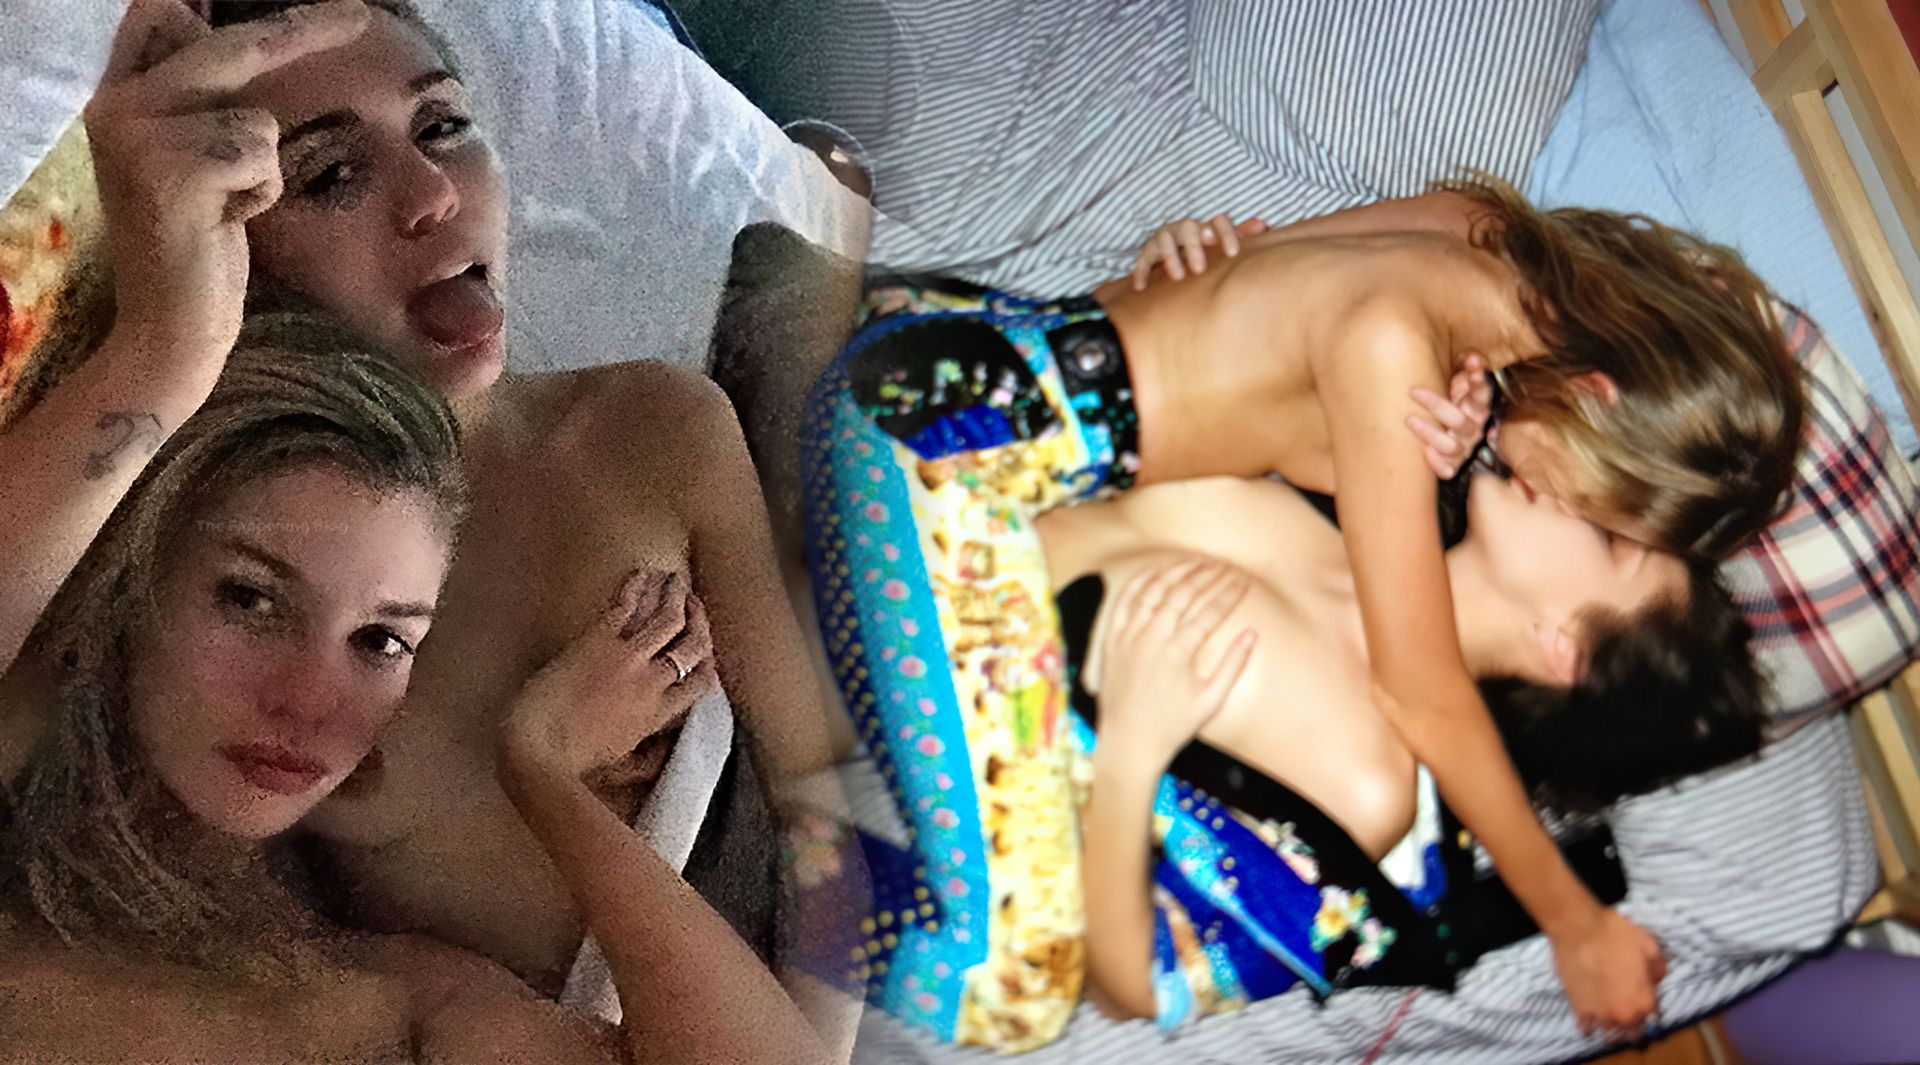 Miley cyrus fappening